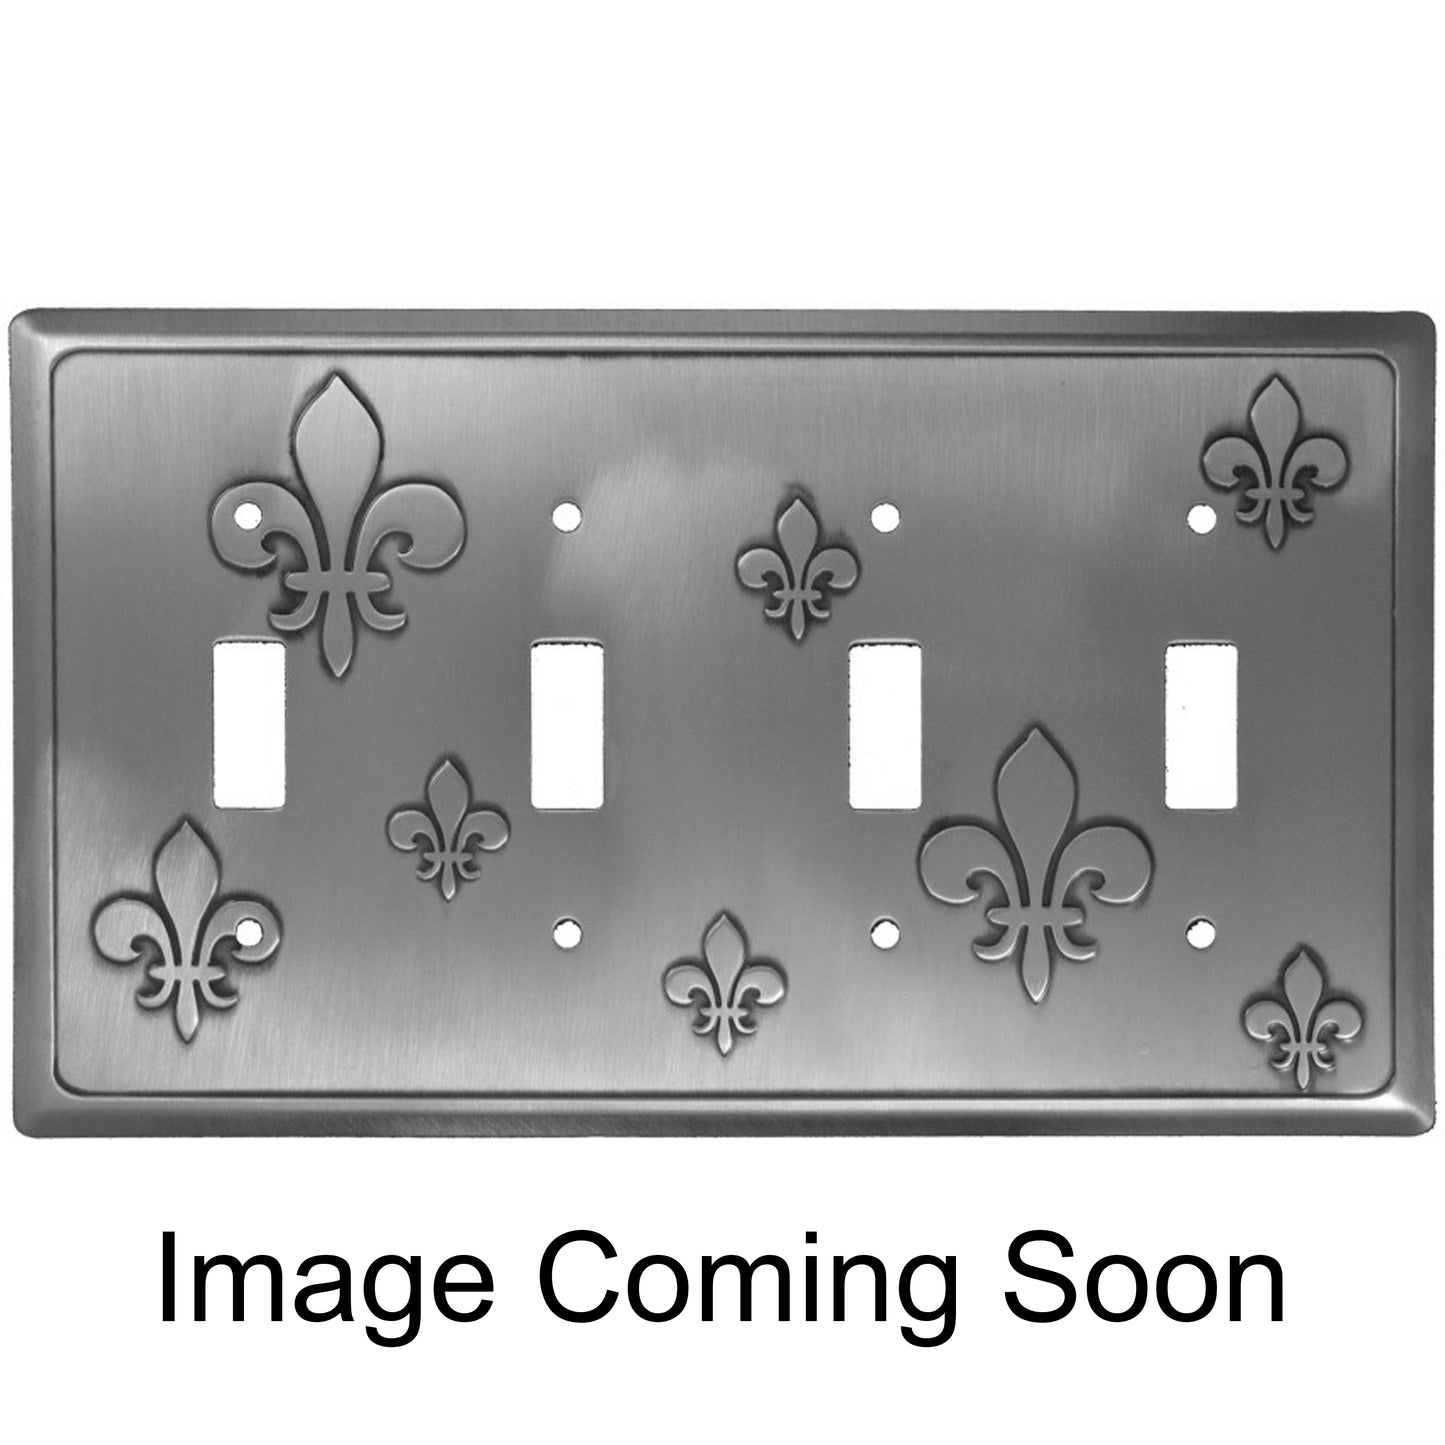 Fleur-de-Lis Stainless Steel 4 Toggle Switchplate